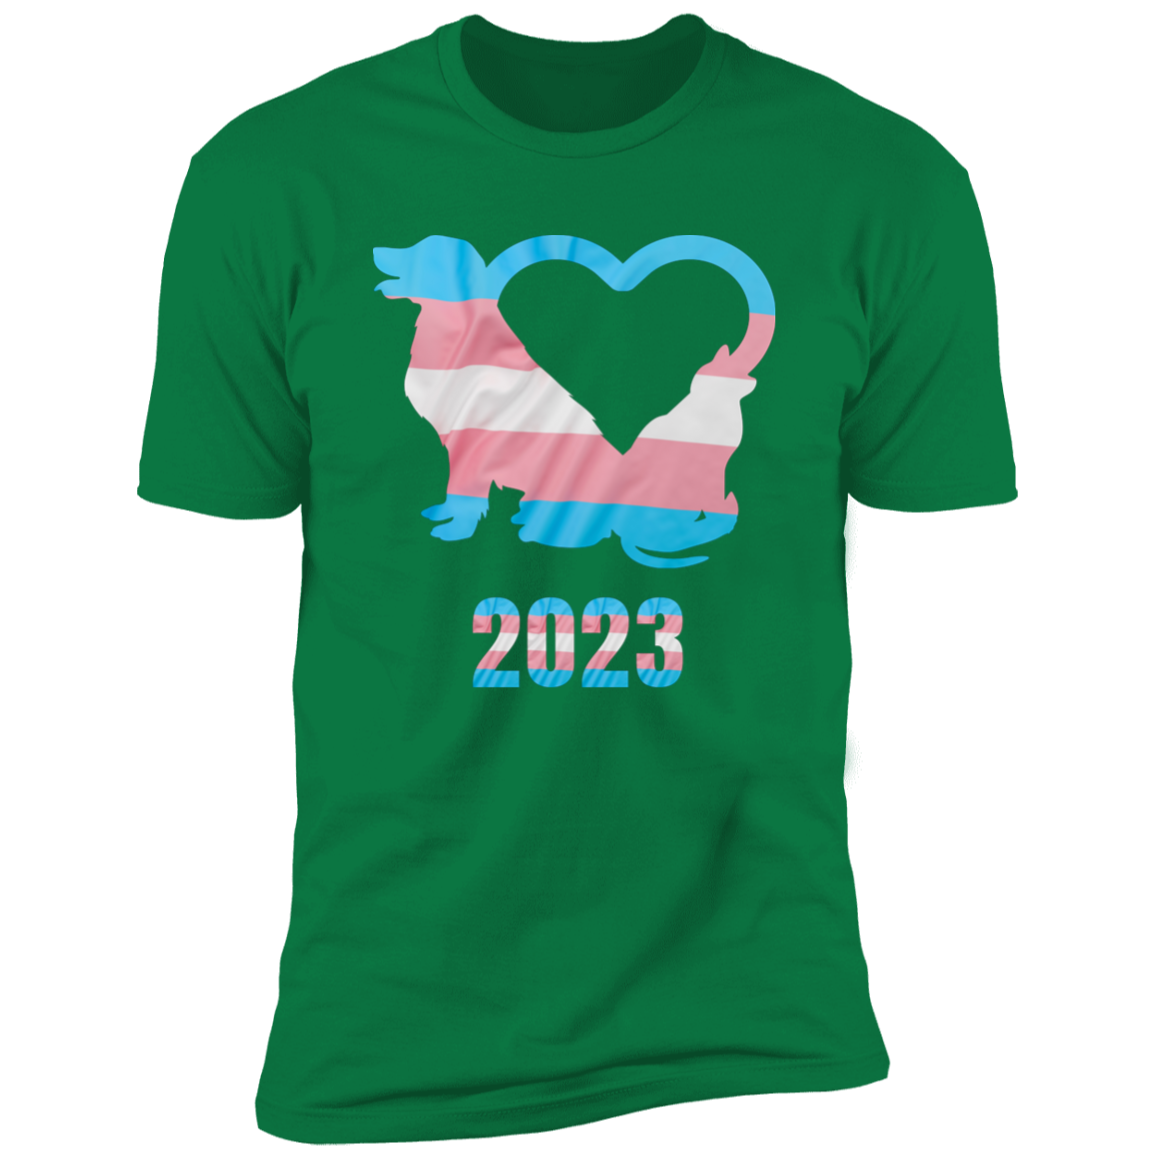 Trans Pride Dog & Cat Heart Pride T-shirt, Trans Pride Dog & Cat Shirt for humans, in kelly green